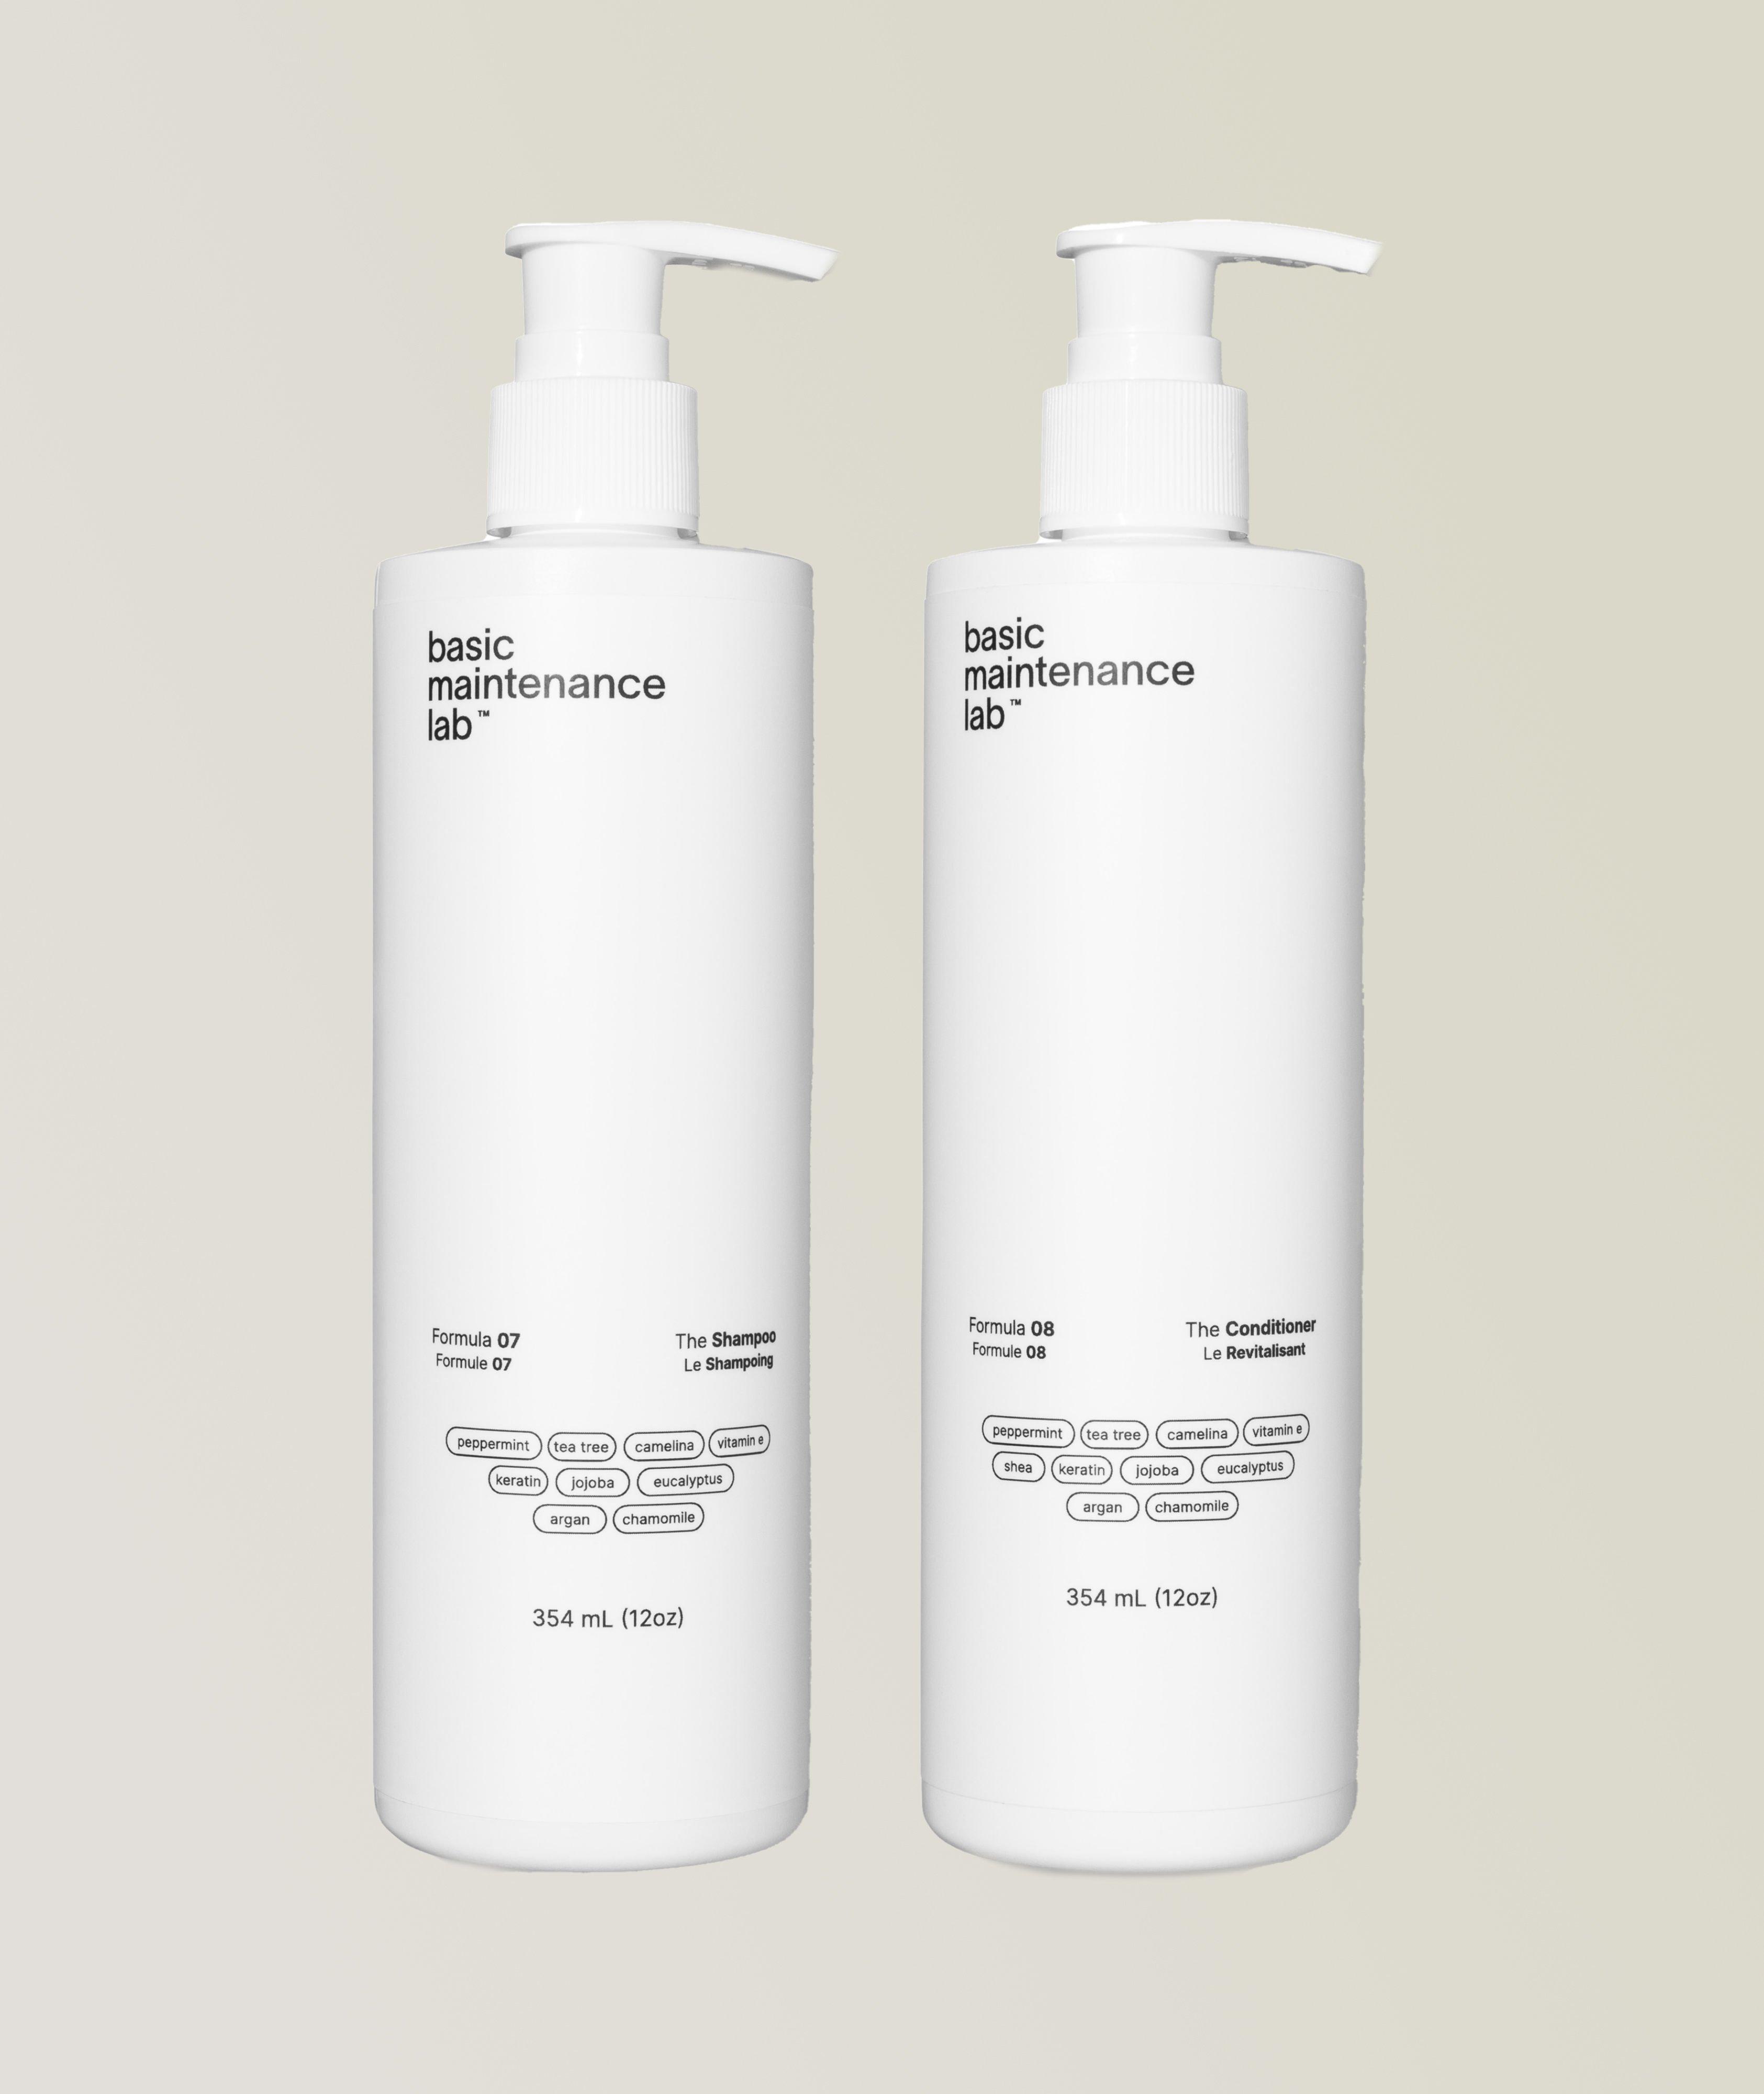 The Ceremony: The Shampoo + The Conditioner